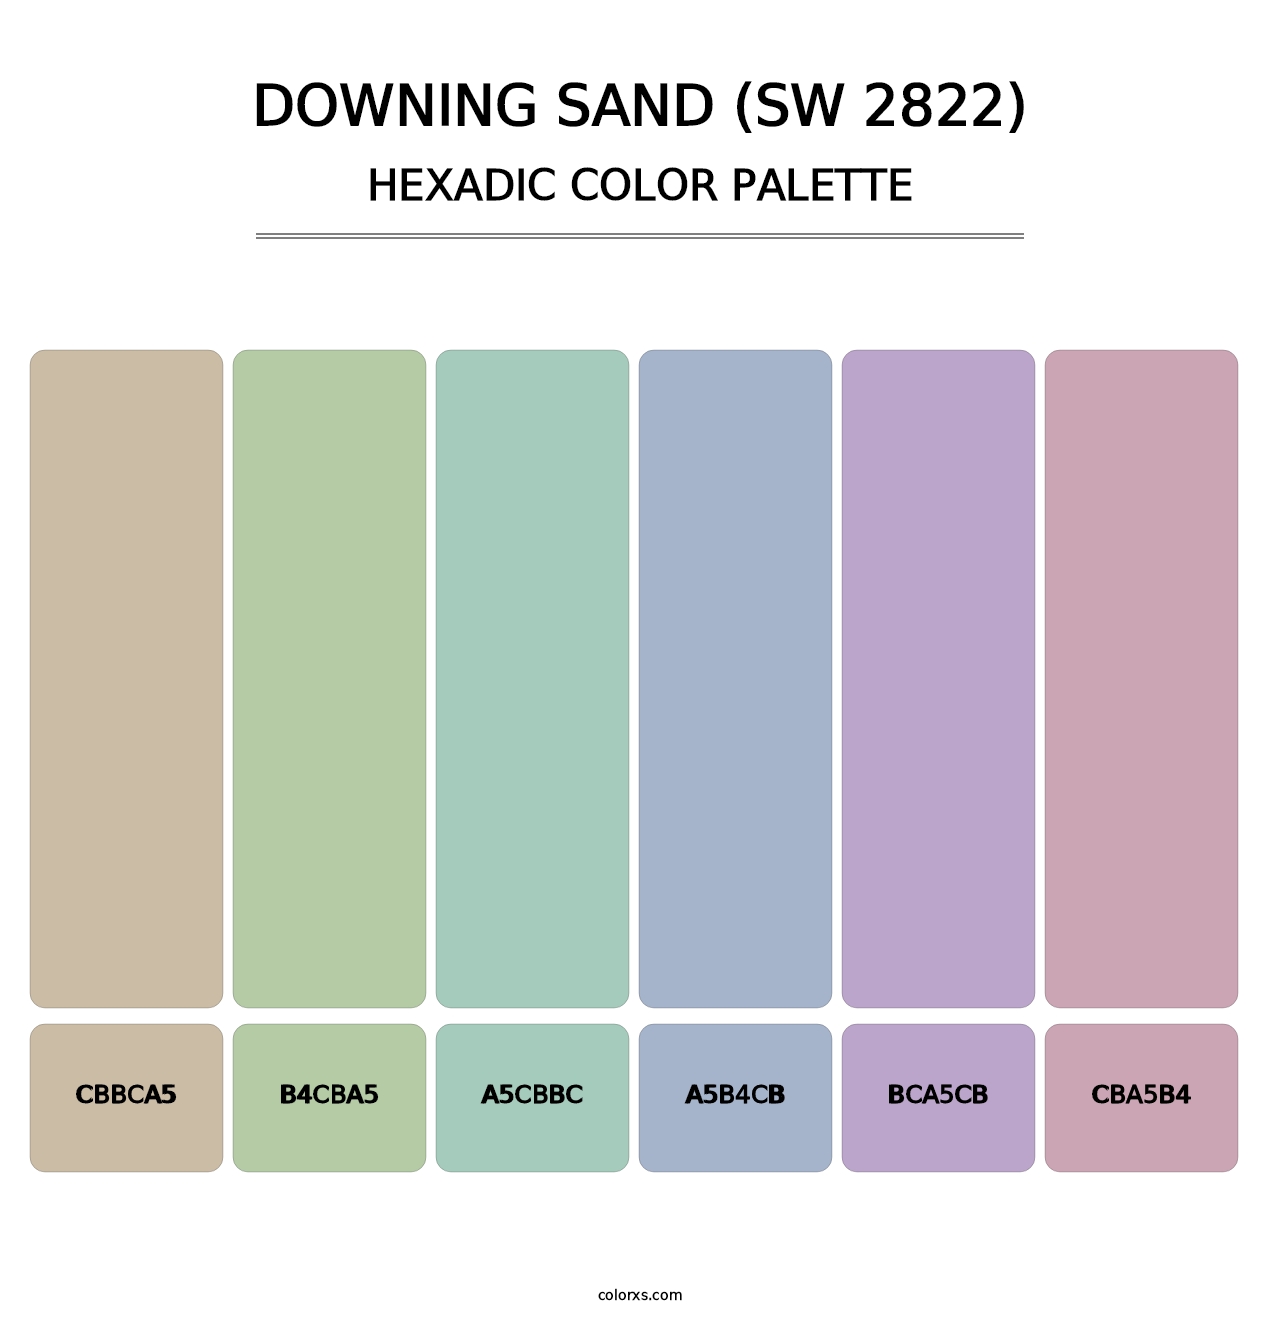 Downing Sand (SW 2822) - Hexadic Color Palette